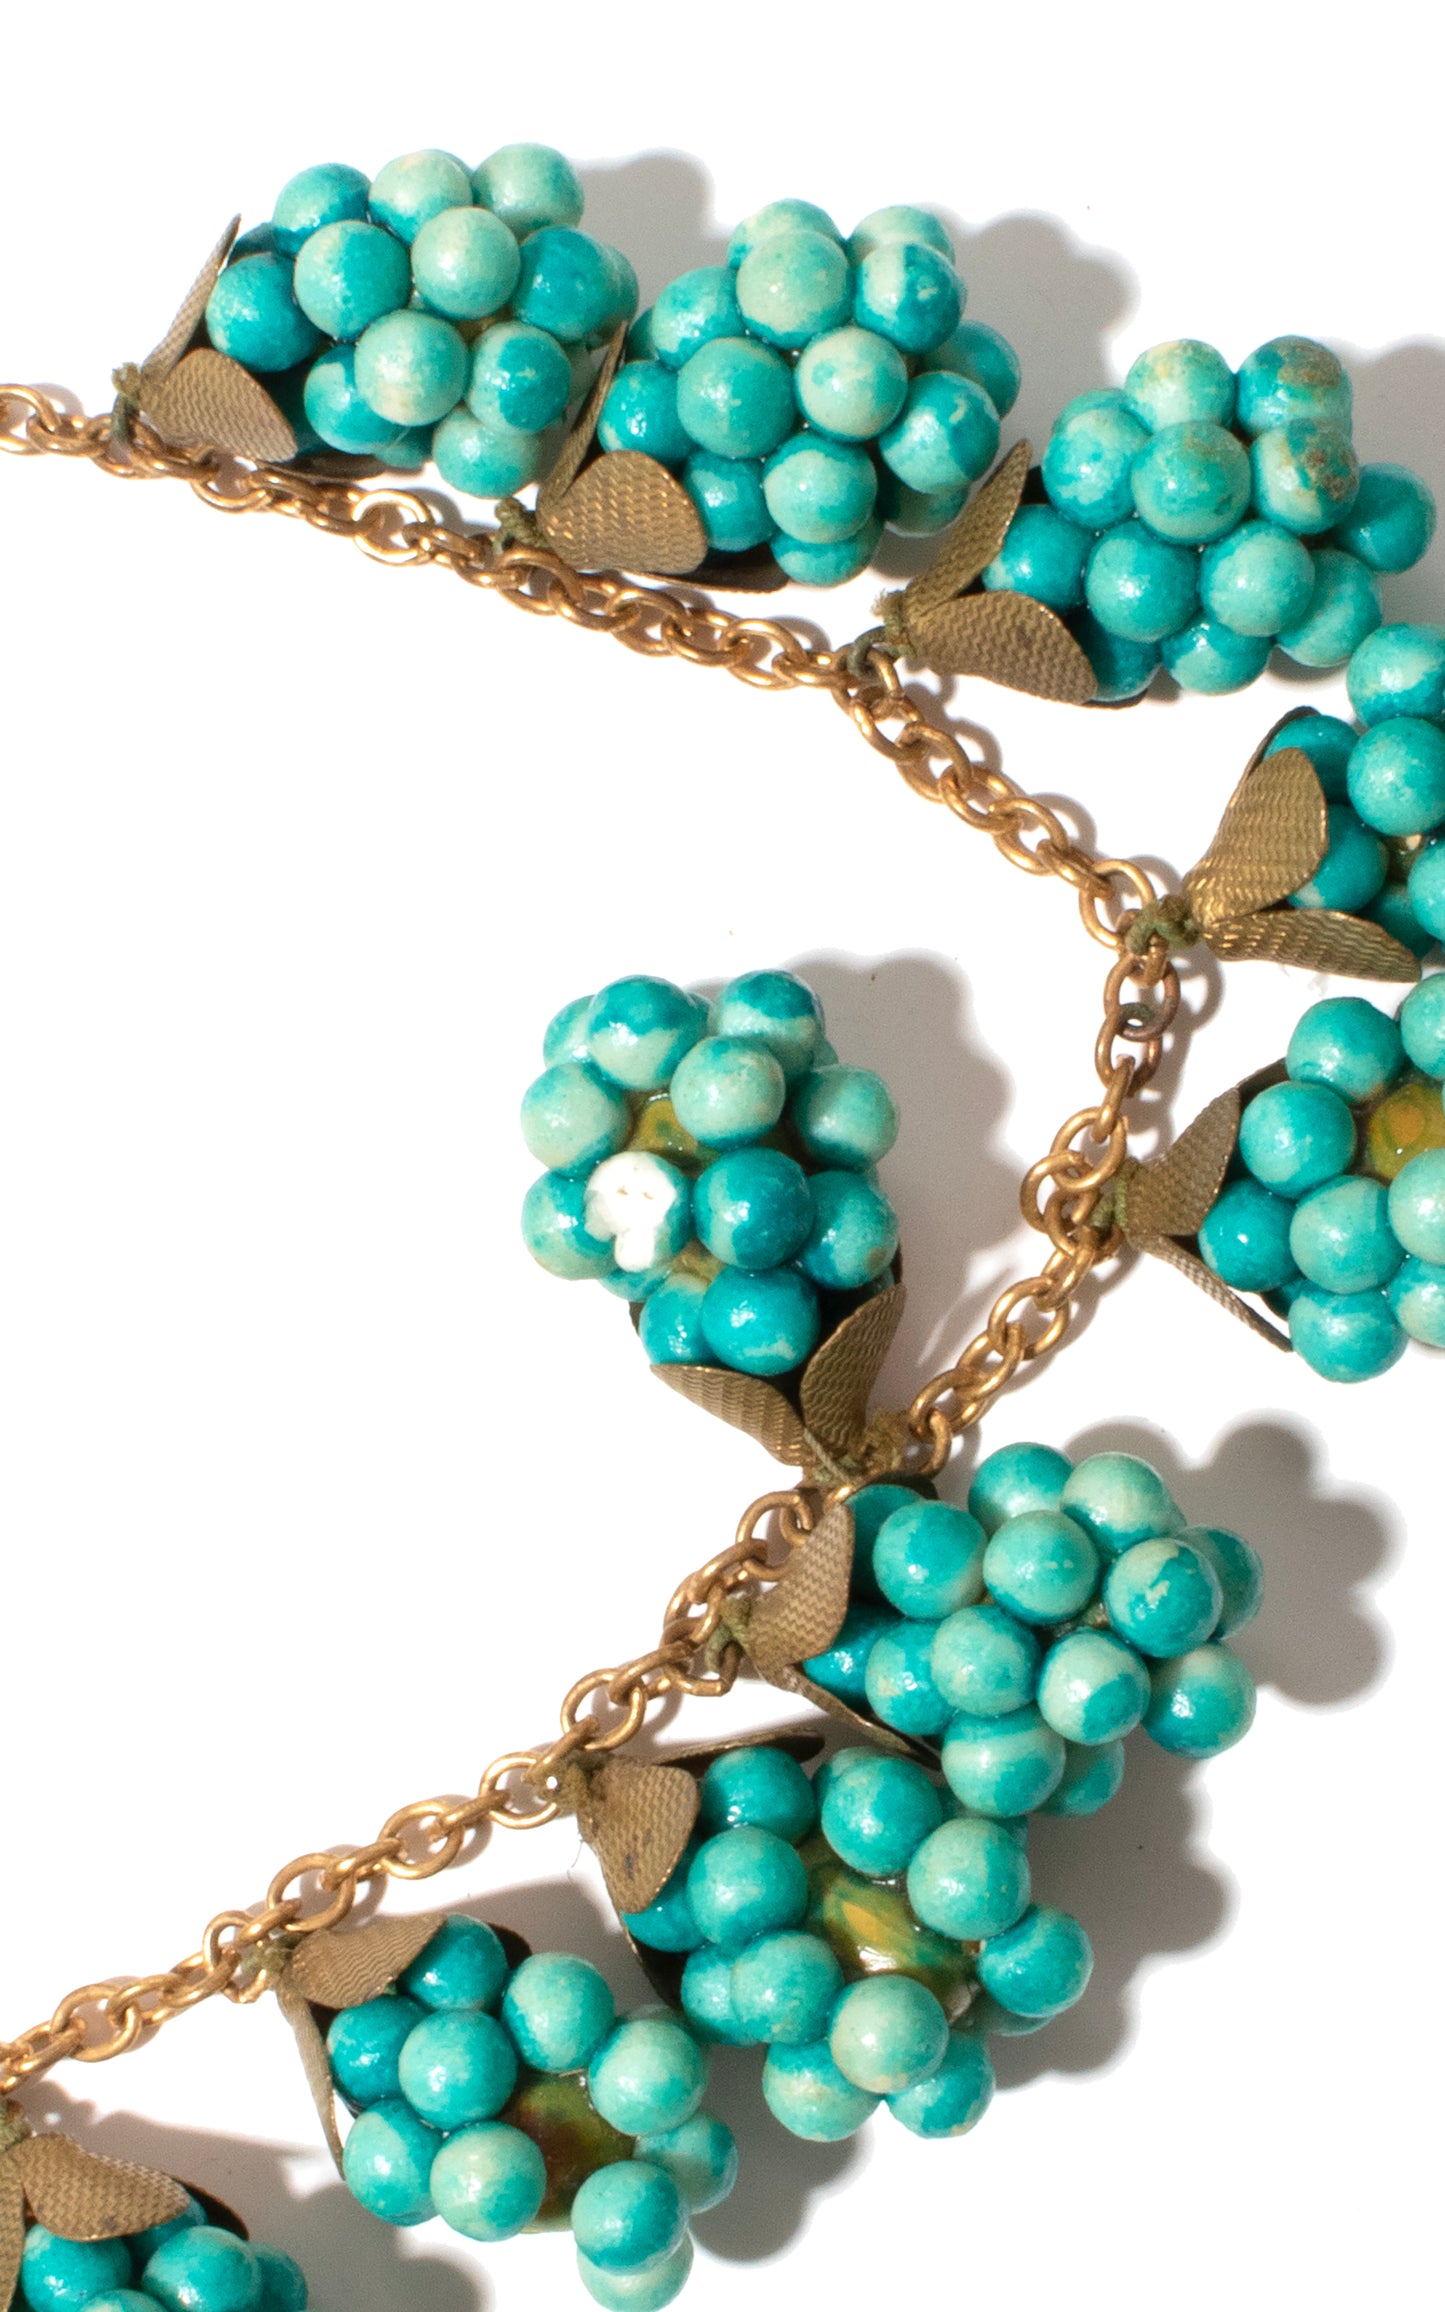 1940s Turquoise Berries Charm Necklace